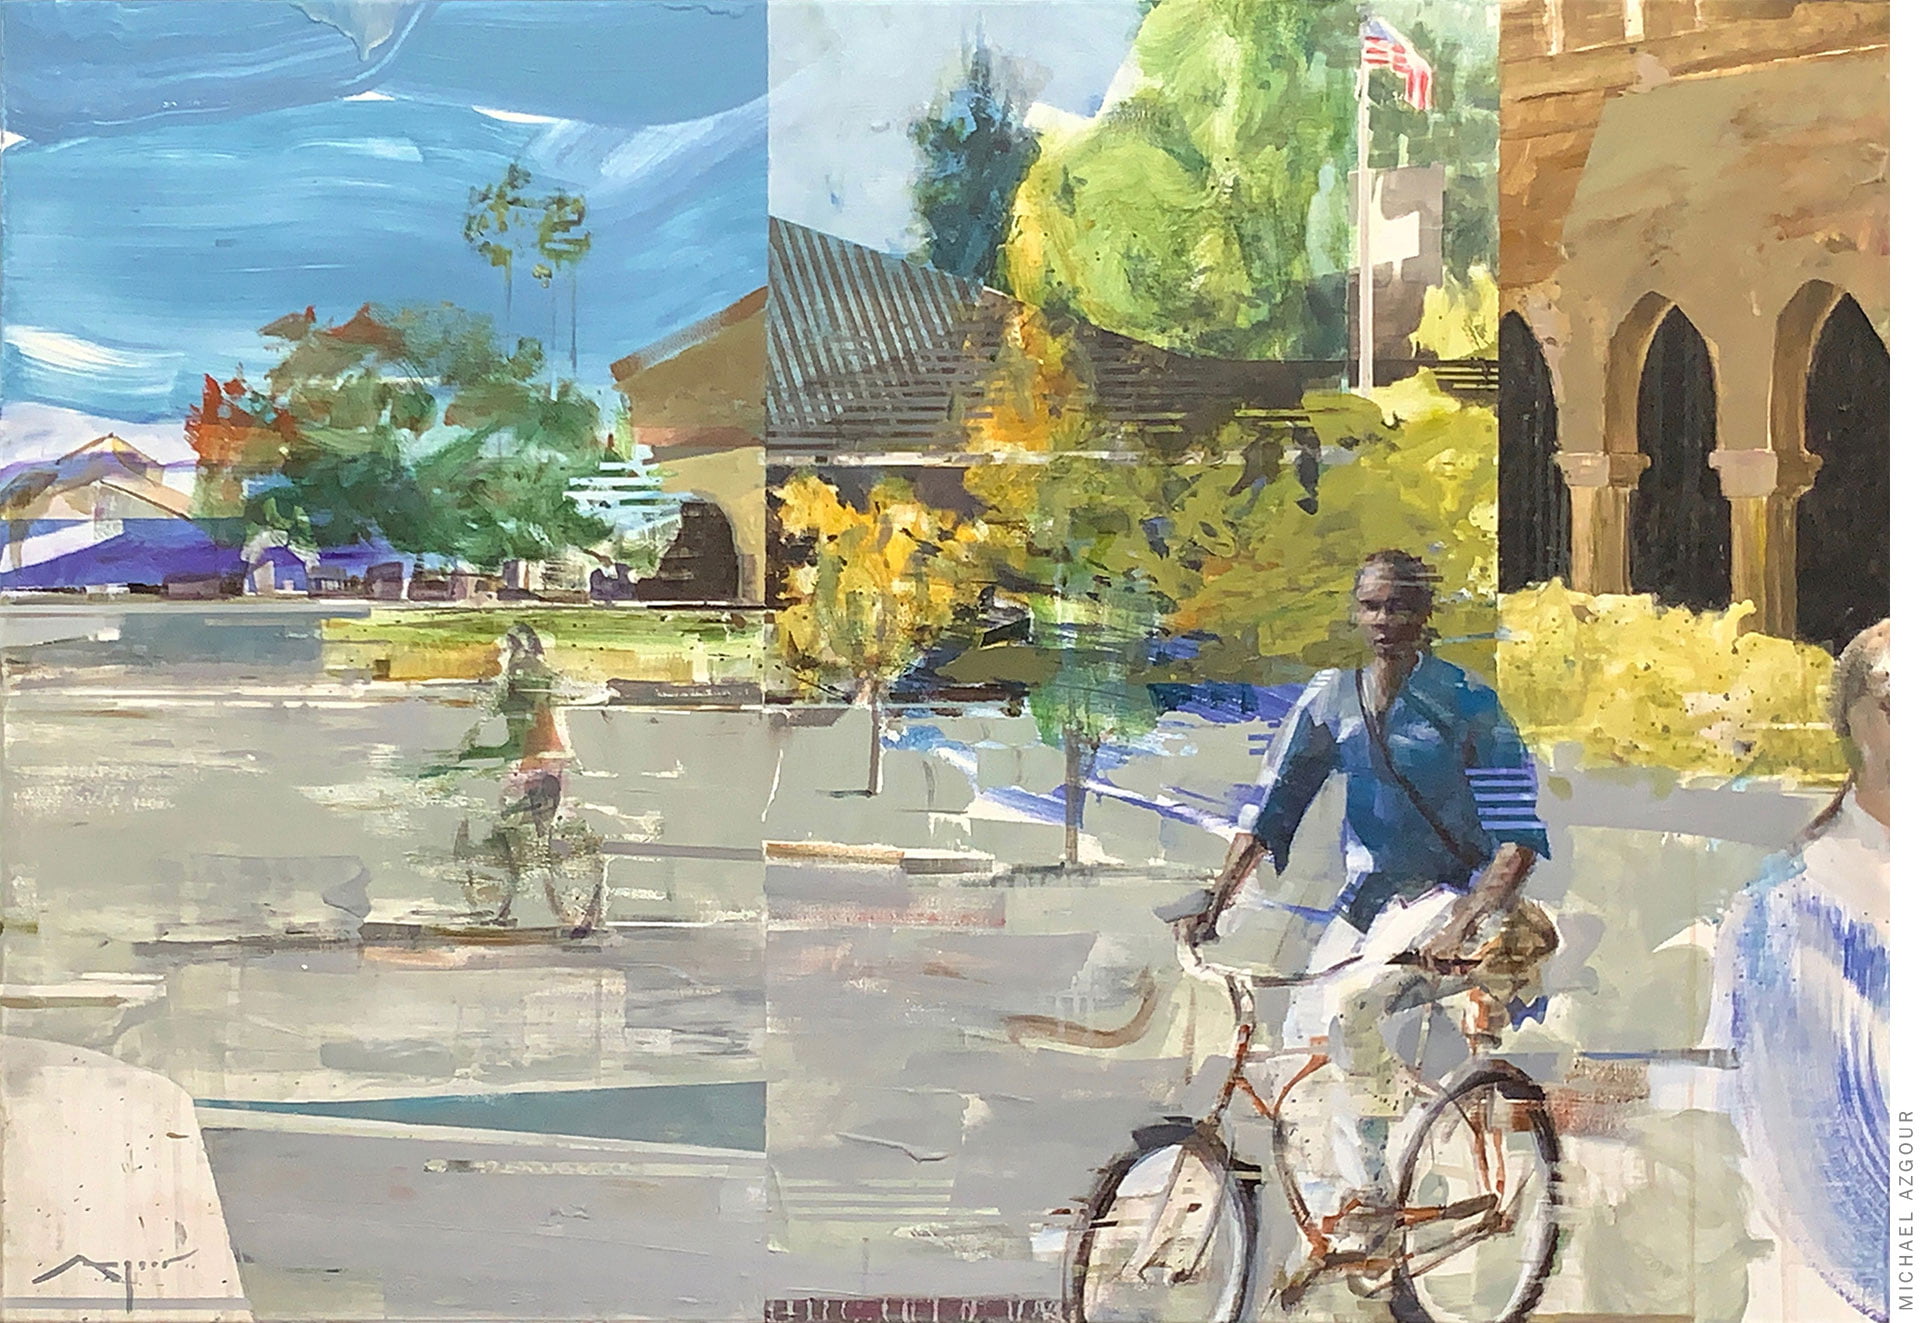 Expressive and abstraction in contemporary art, this painting depicts a city street with people cycling, painting titled Calibration by Californian artist Michael Azgour